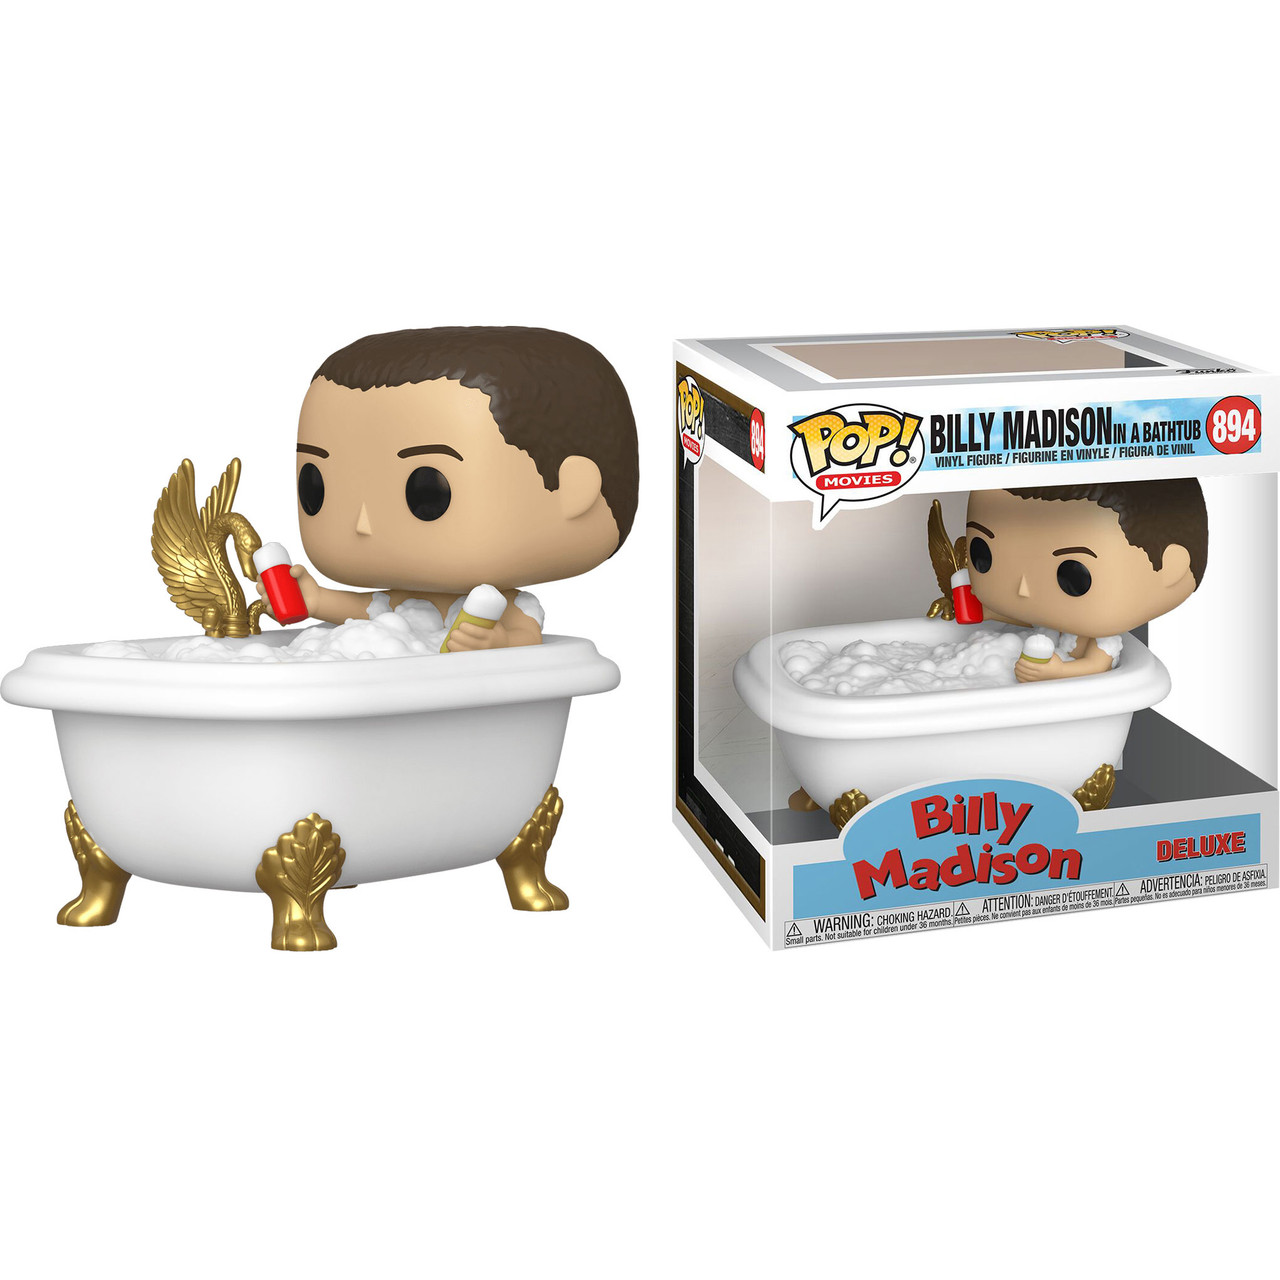 46587 Deluxe Billy Madison in Bath Tub Collectible Toy Vinyl Figure Funko POP 